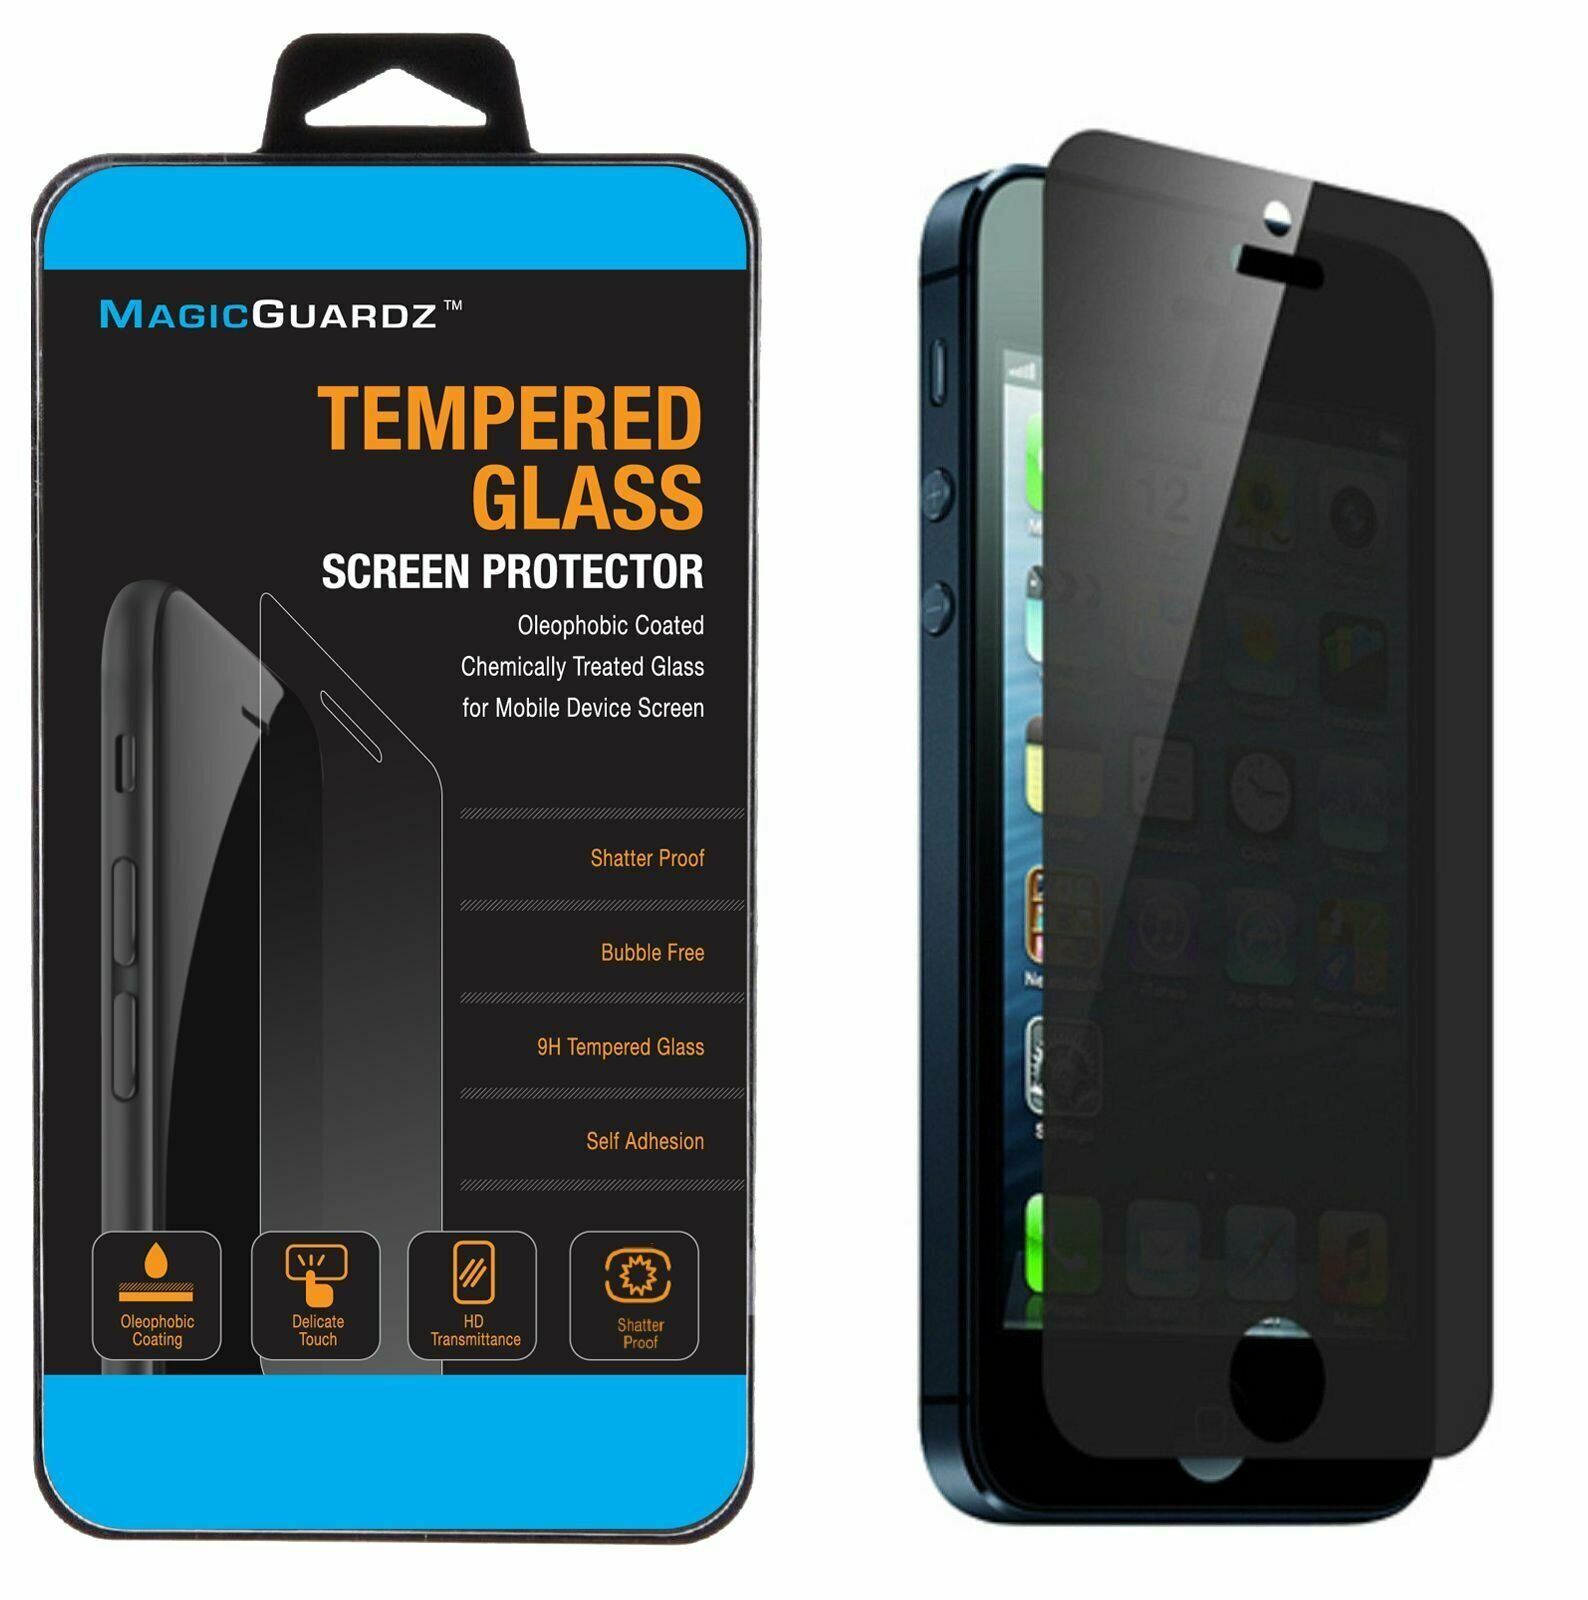 Privacy Anti-Spy Tempered Glass Screen Protector Shield for iPhone 5 5S 5C